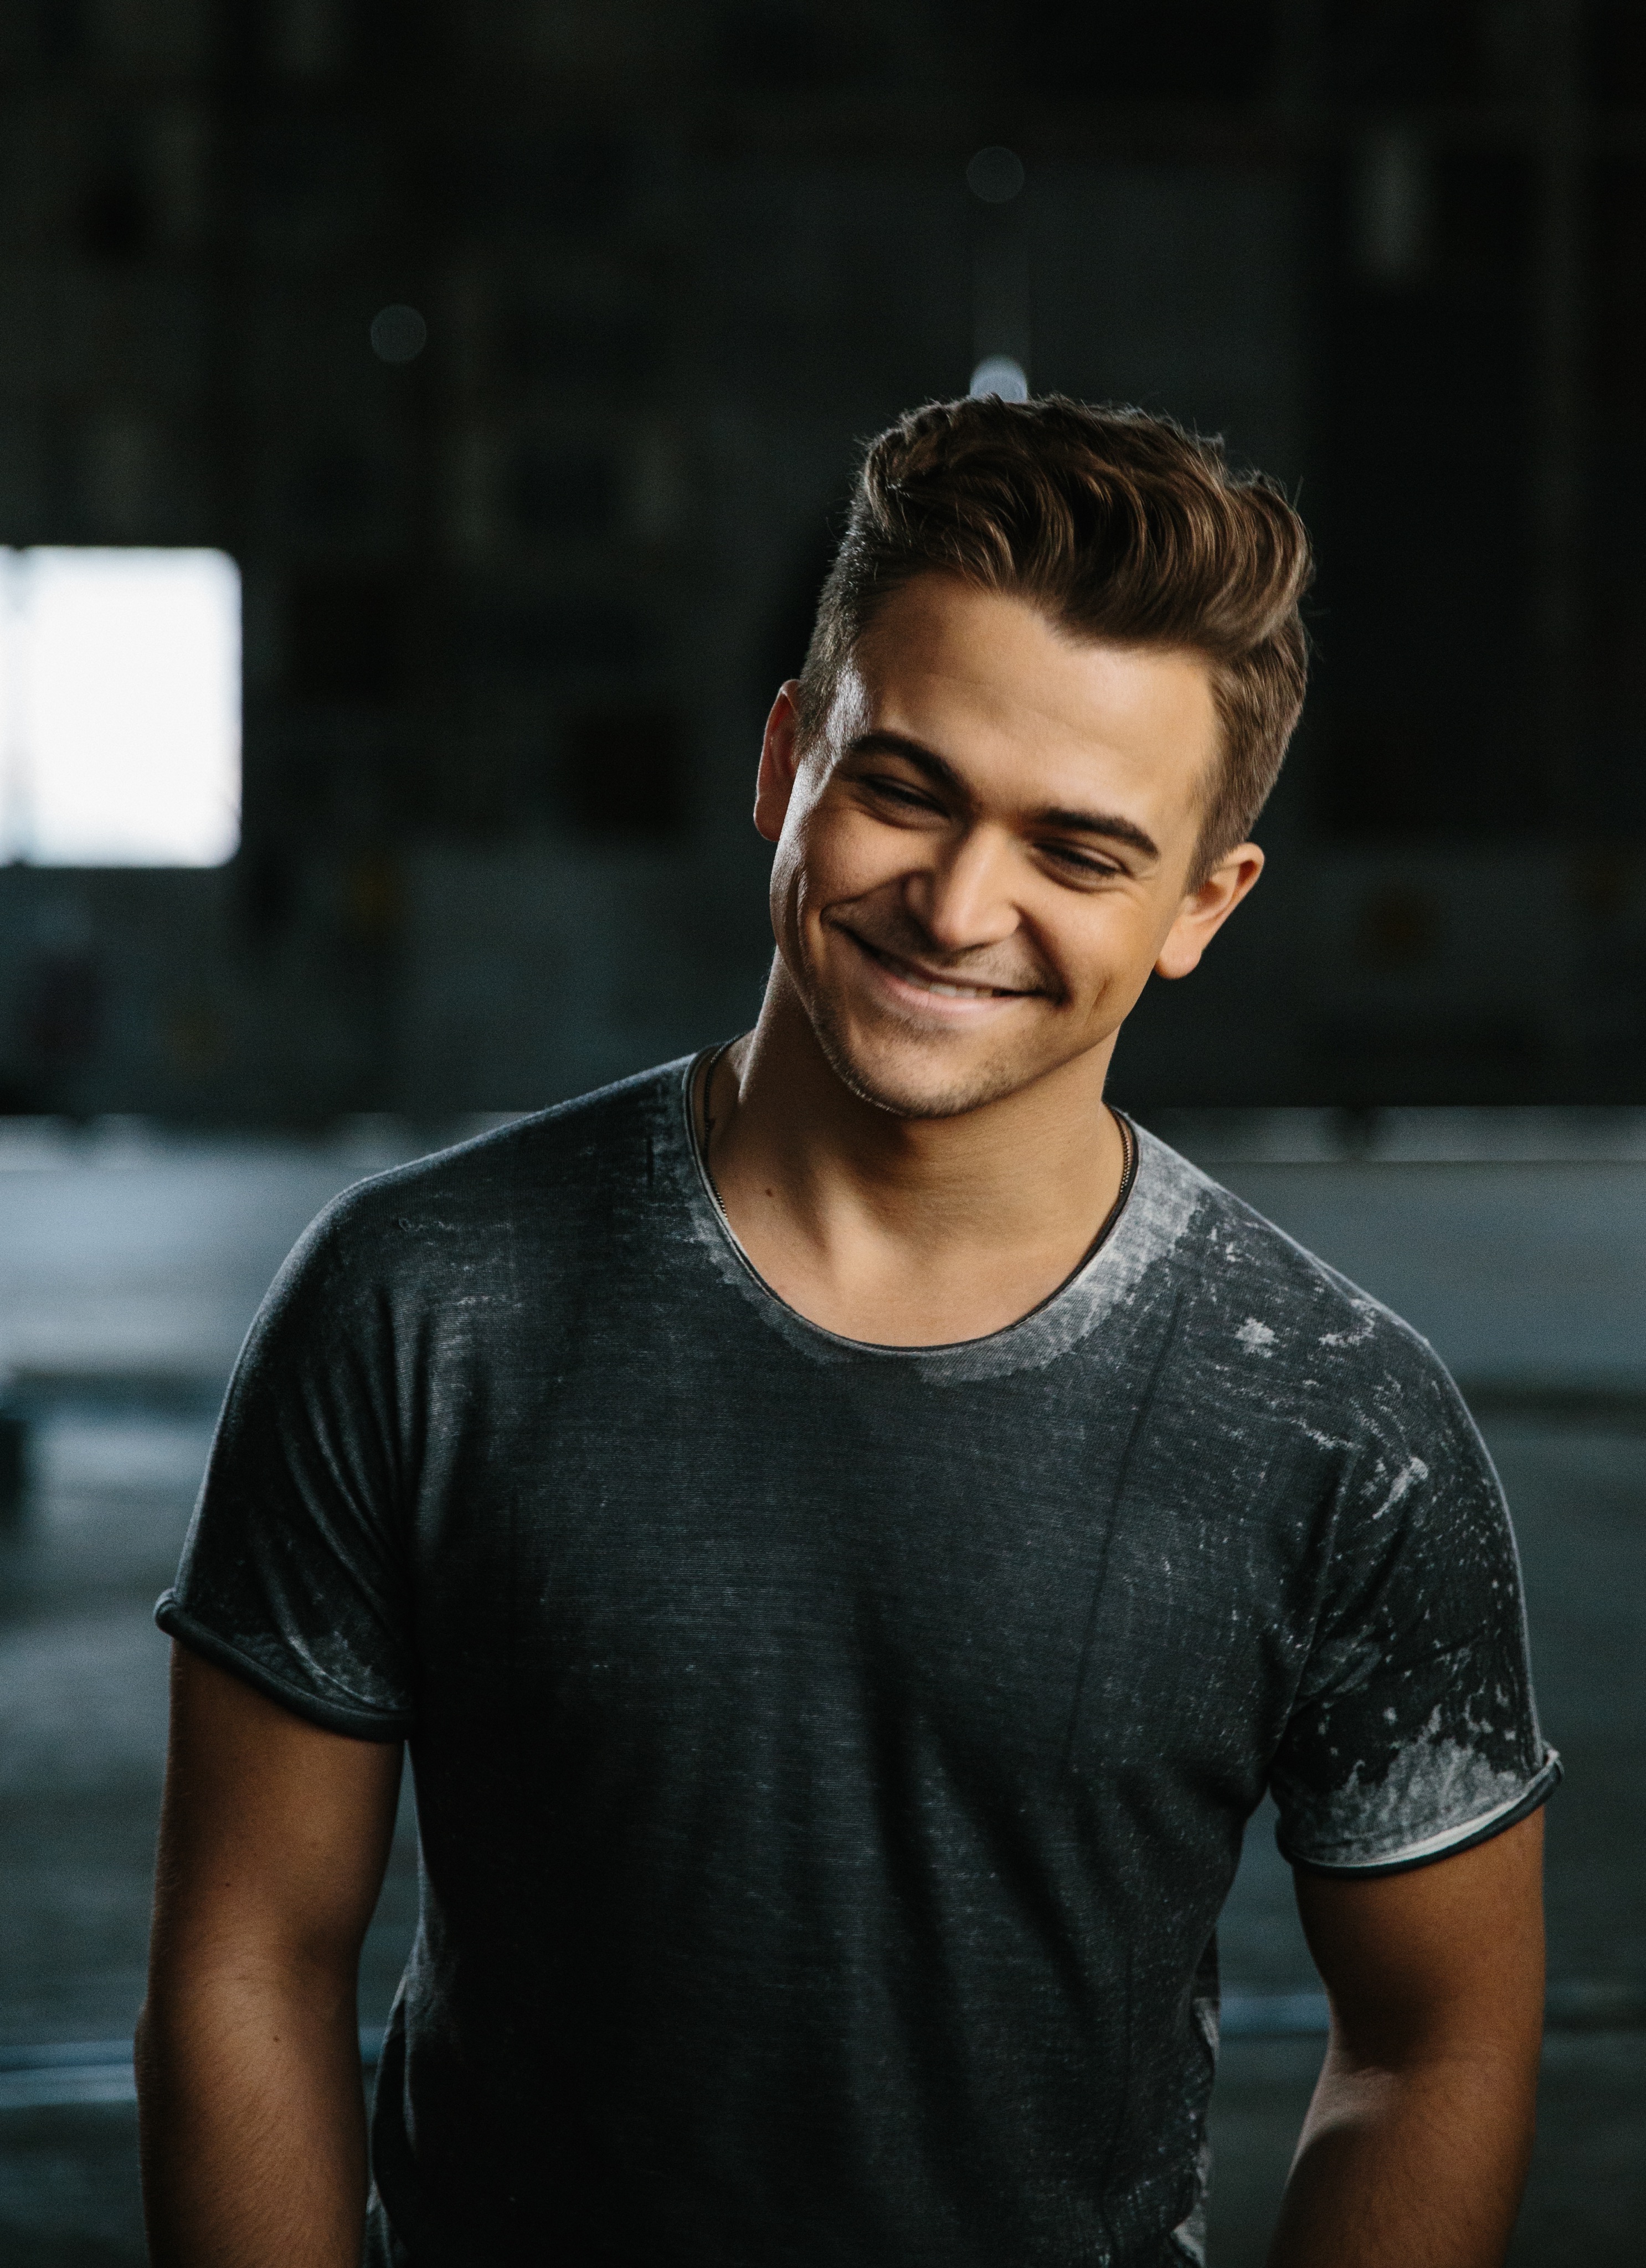 Hunter Hayes talks insecurities and feelings of not being good enough on the Jesus Calling podcast